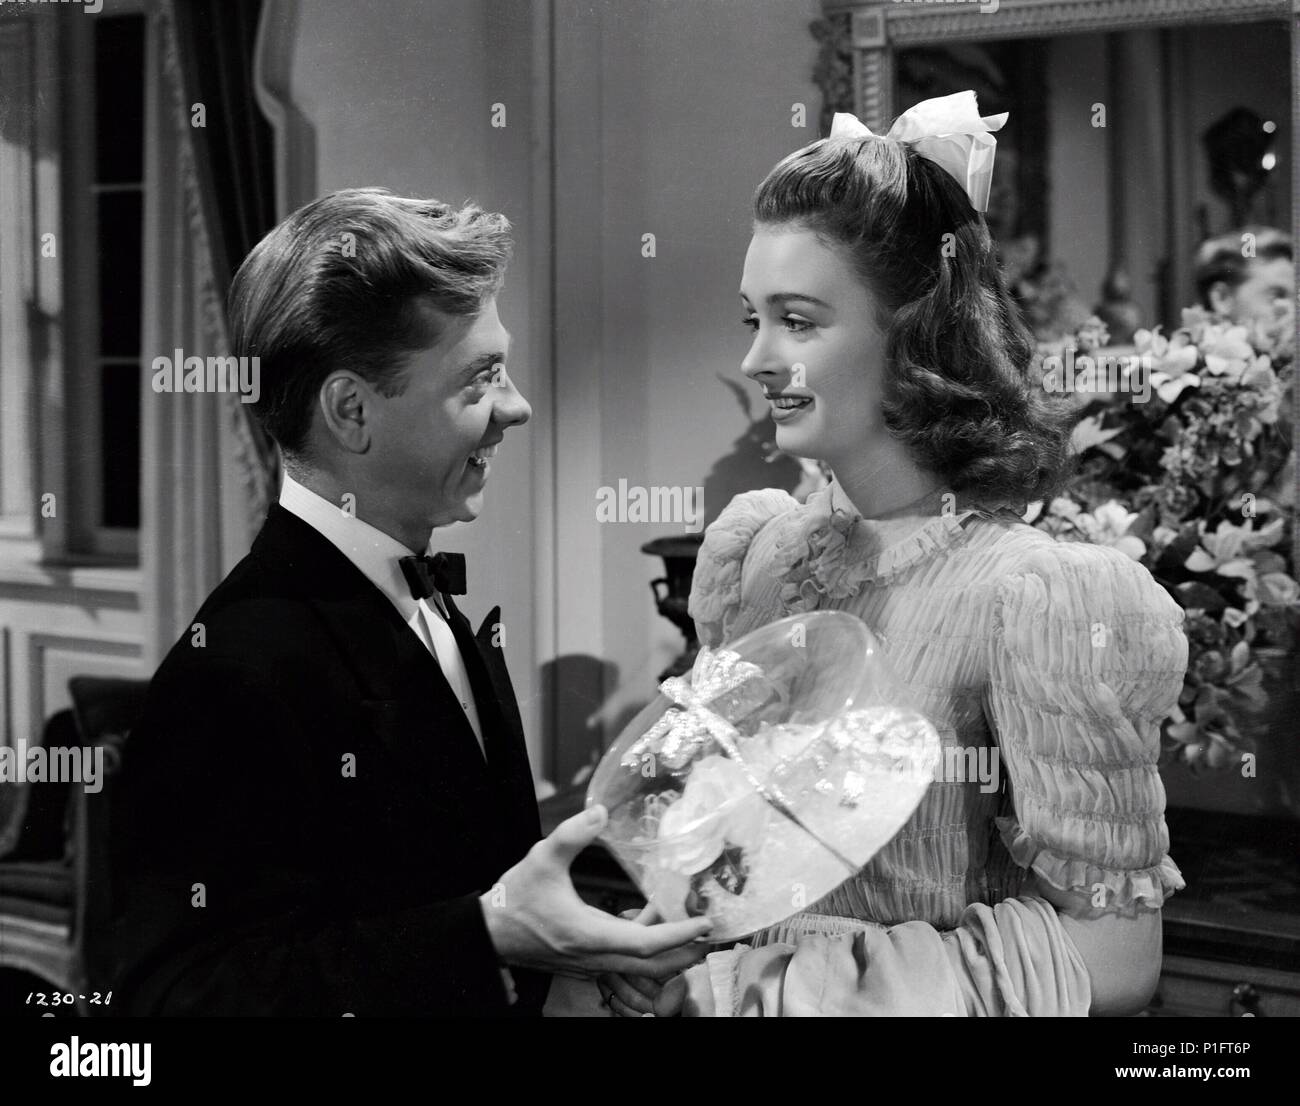 Original Film Title: THE COURTSHIP OF ANDY HARDY.  English Title: THE COURTSHIP OF ANDY HARDY.  Film Director: GEORGE B. SEITZ.  Year: 1942.  Stars: DONNA REED; MICKEY ROONEY. Credit: M.G.M / Album Stock Photo